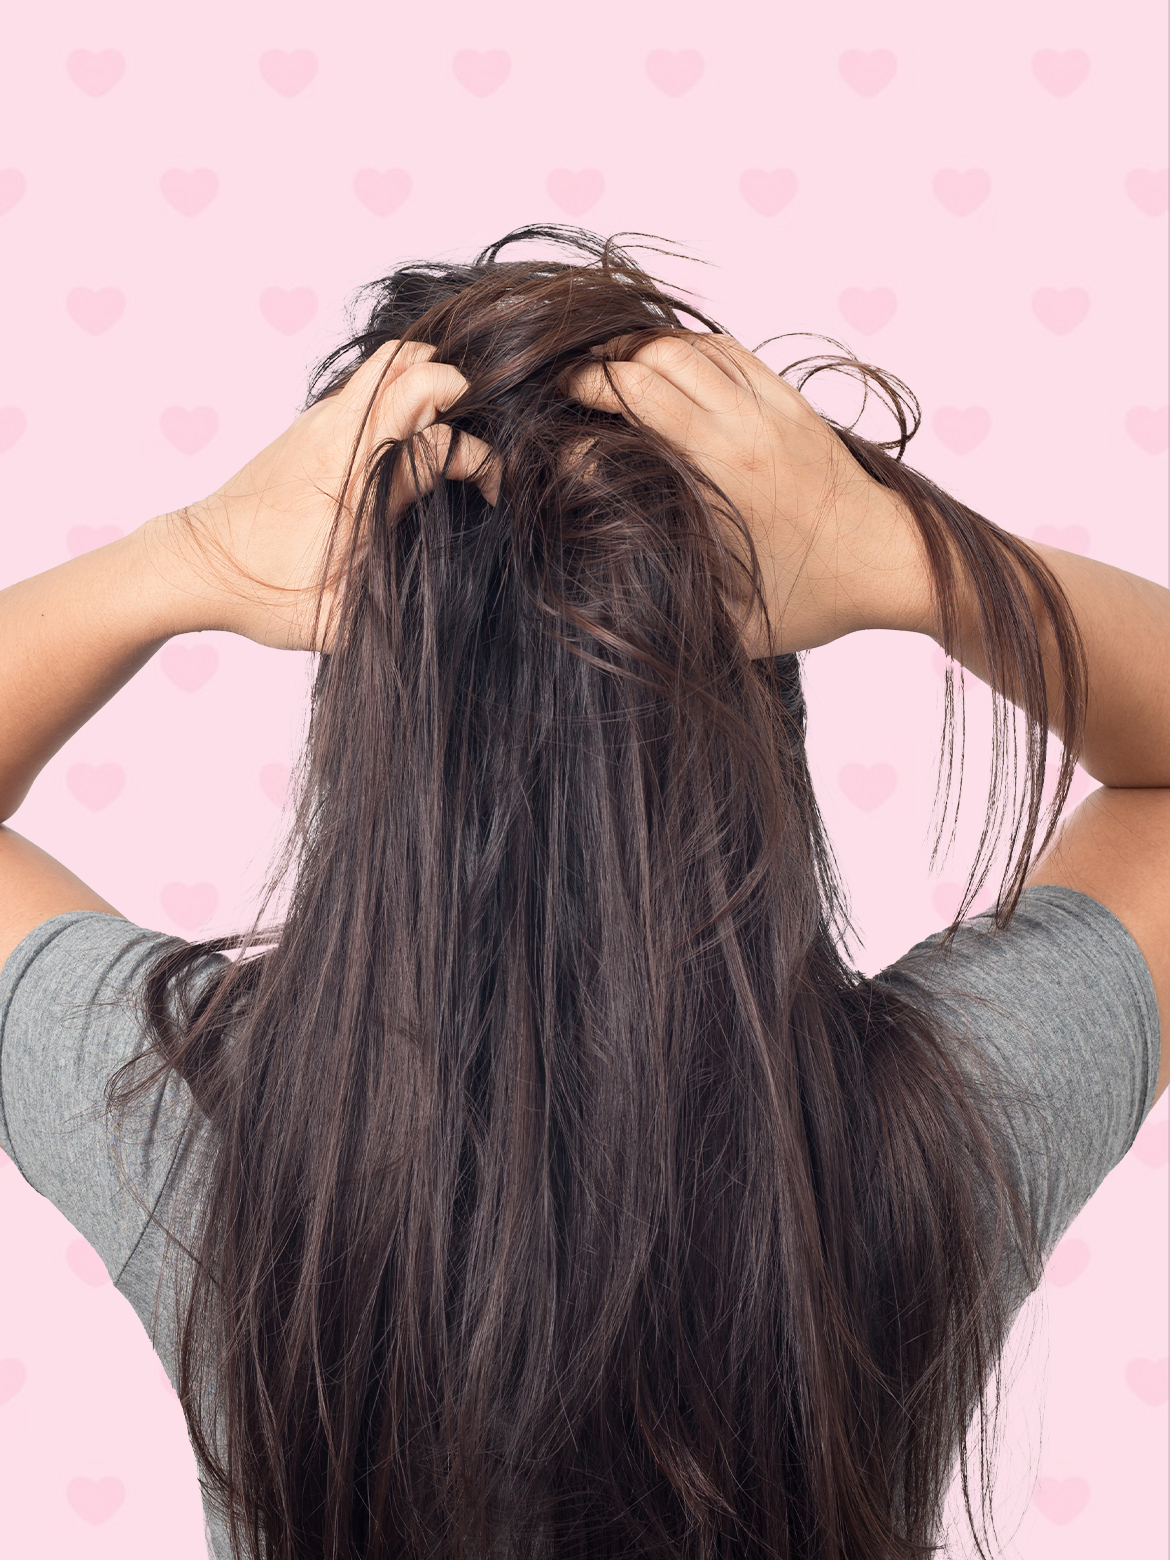 How To Deal With Dry & Damaged Hair | SUGAR Cosmetics